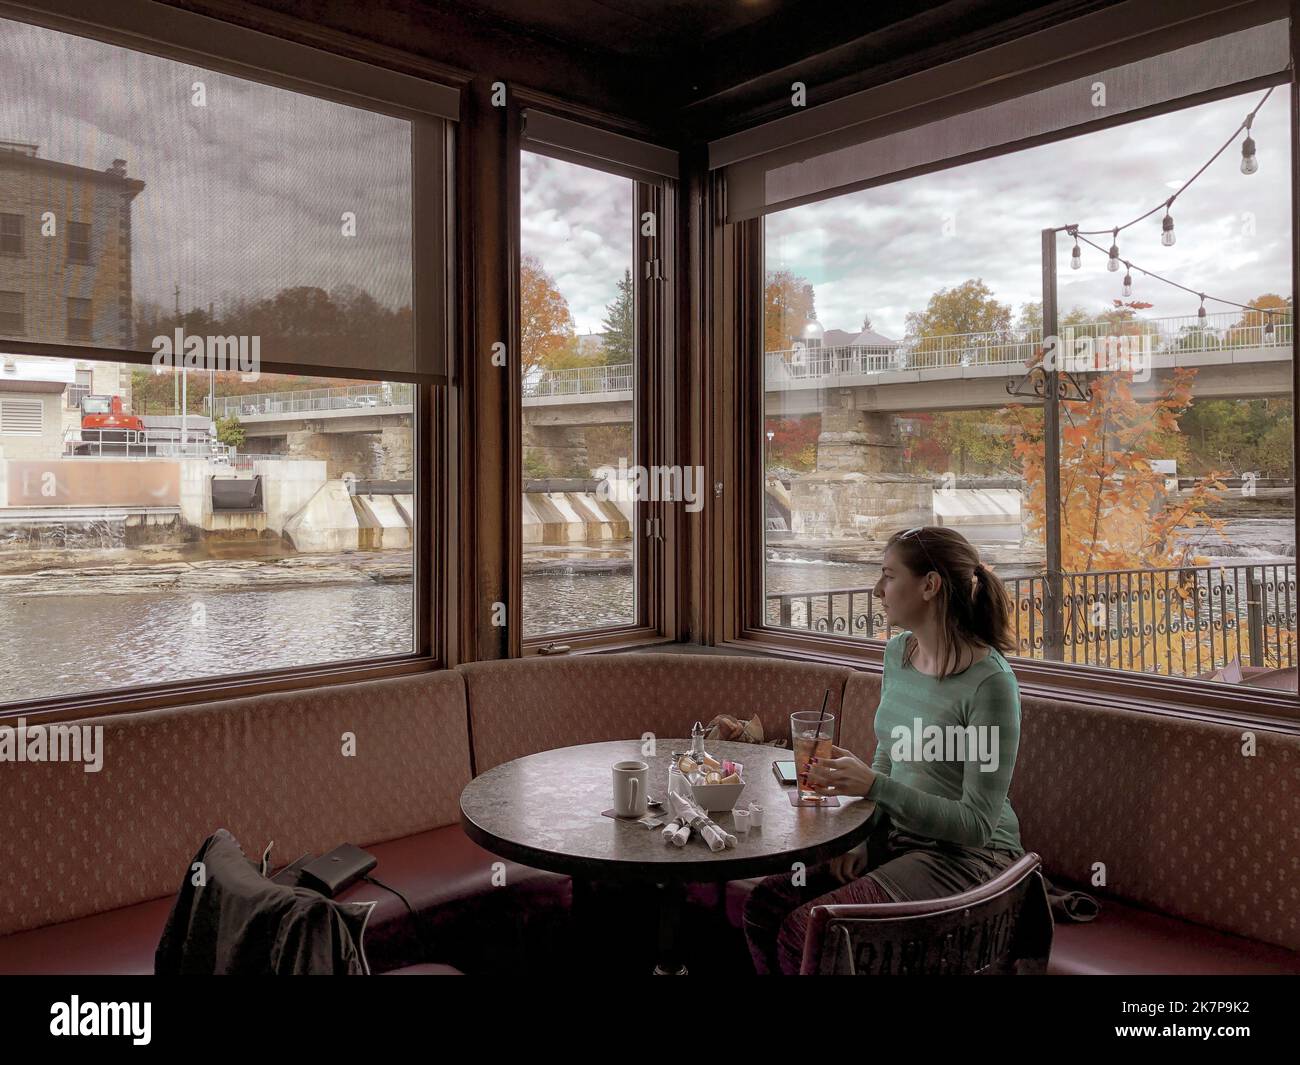 A girl enjoys a drink in front of a full corner fall view; retro, vintage image of dining out. Stock Photo